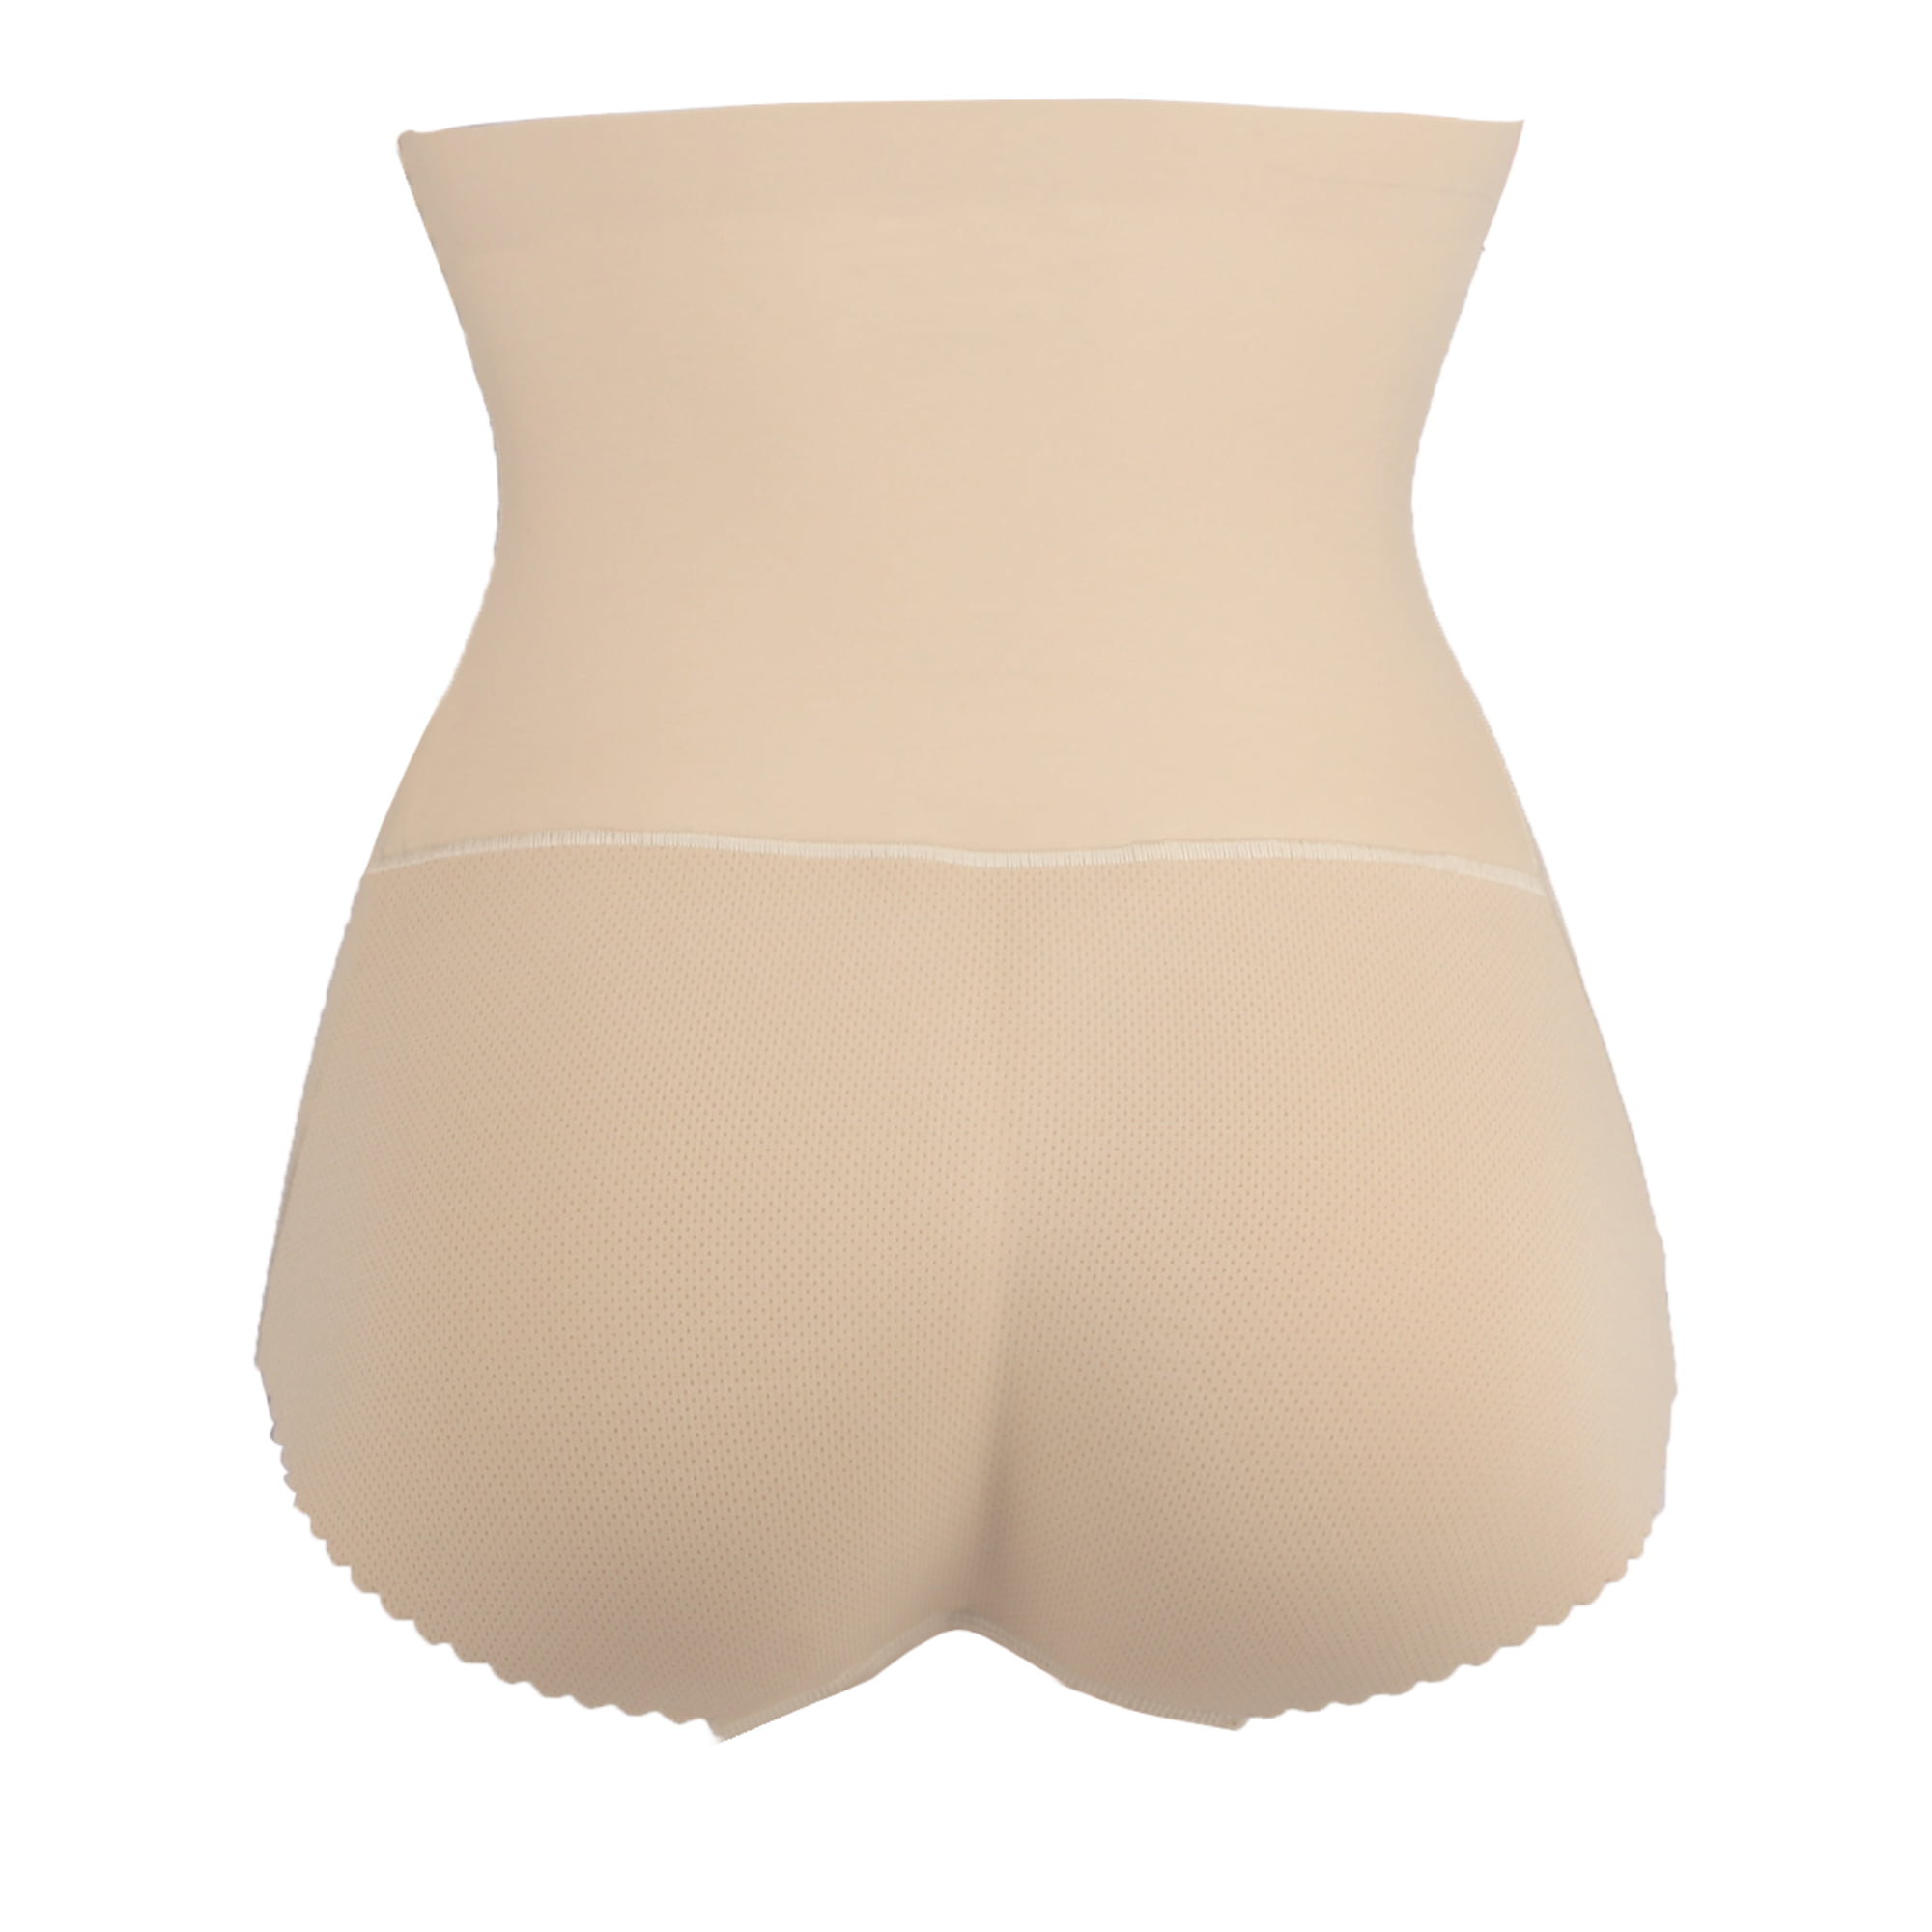 Padded Underwear Body Shaper Control Panties With Butt Pads Filler High  Waist Shapewear Tummy Control Slimming Corrective Briefs